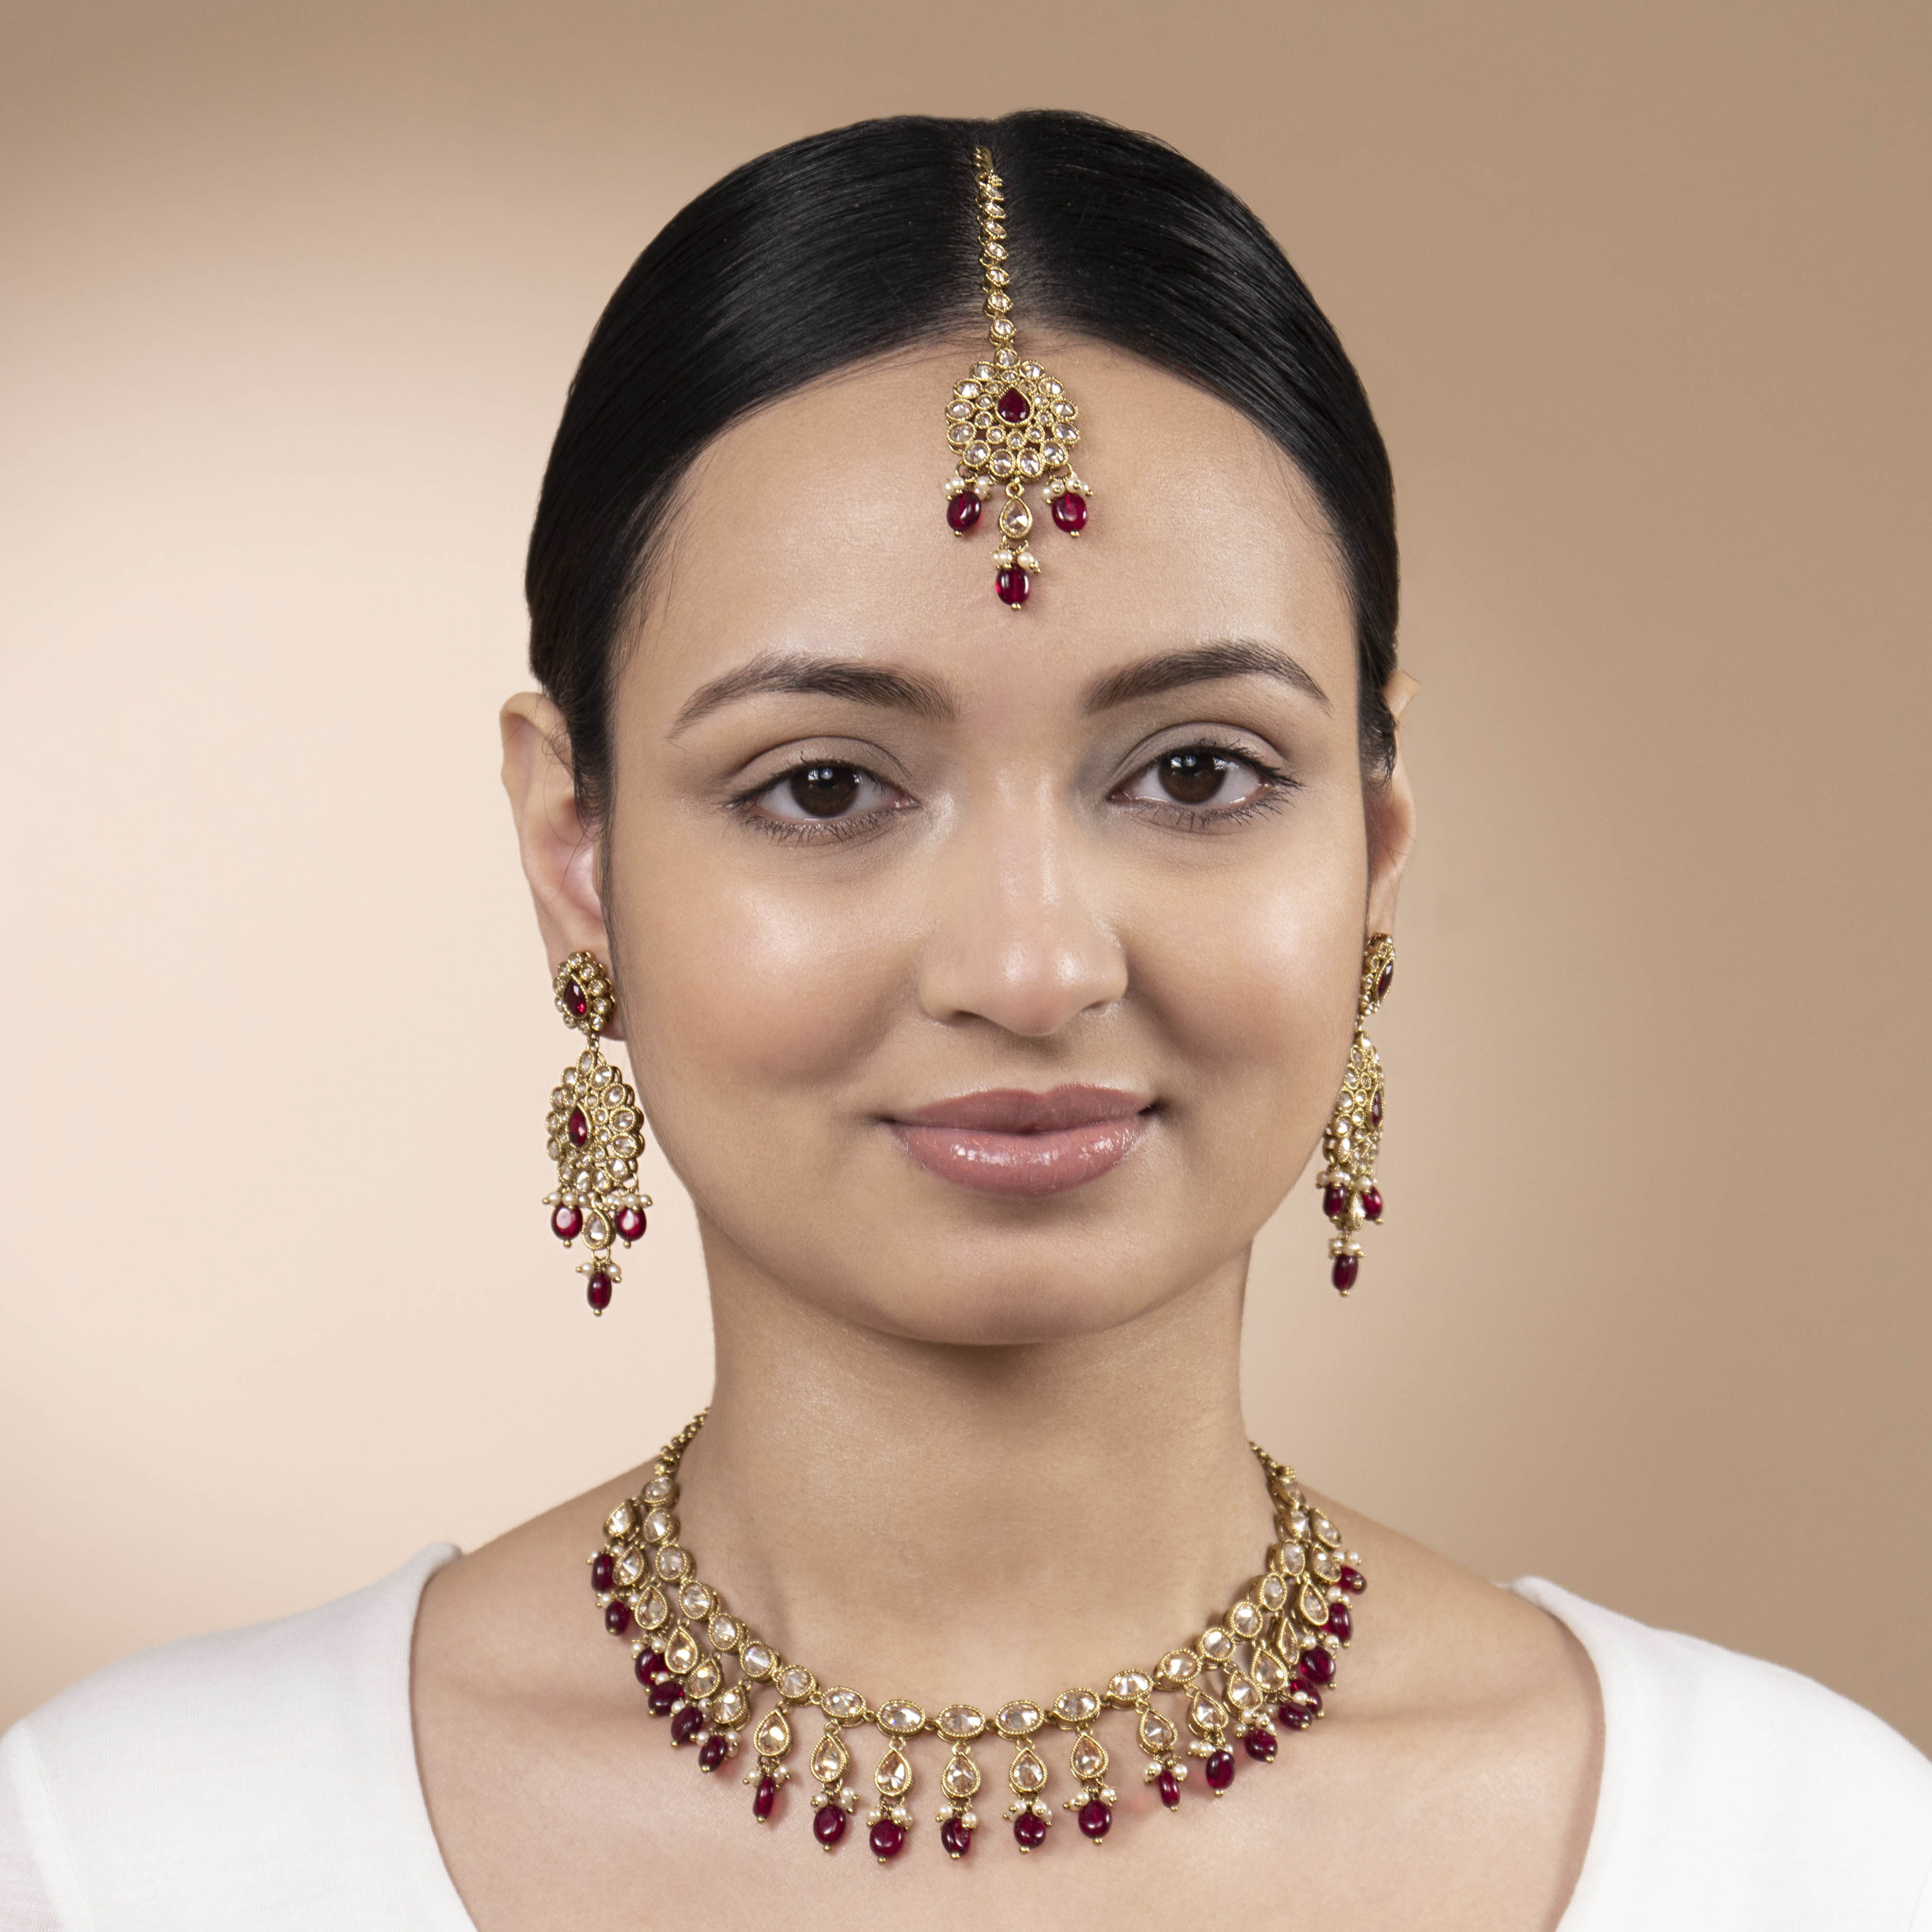 Nilima Necklace Set in Maroon